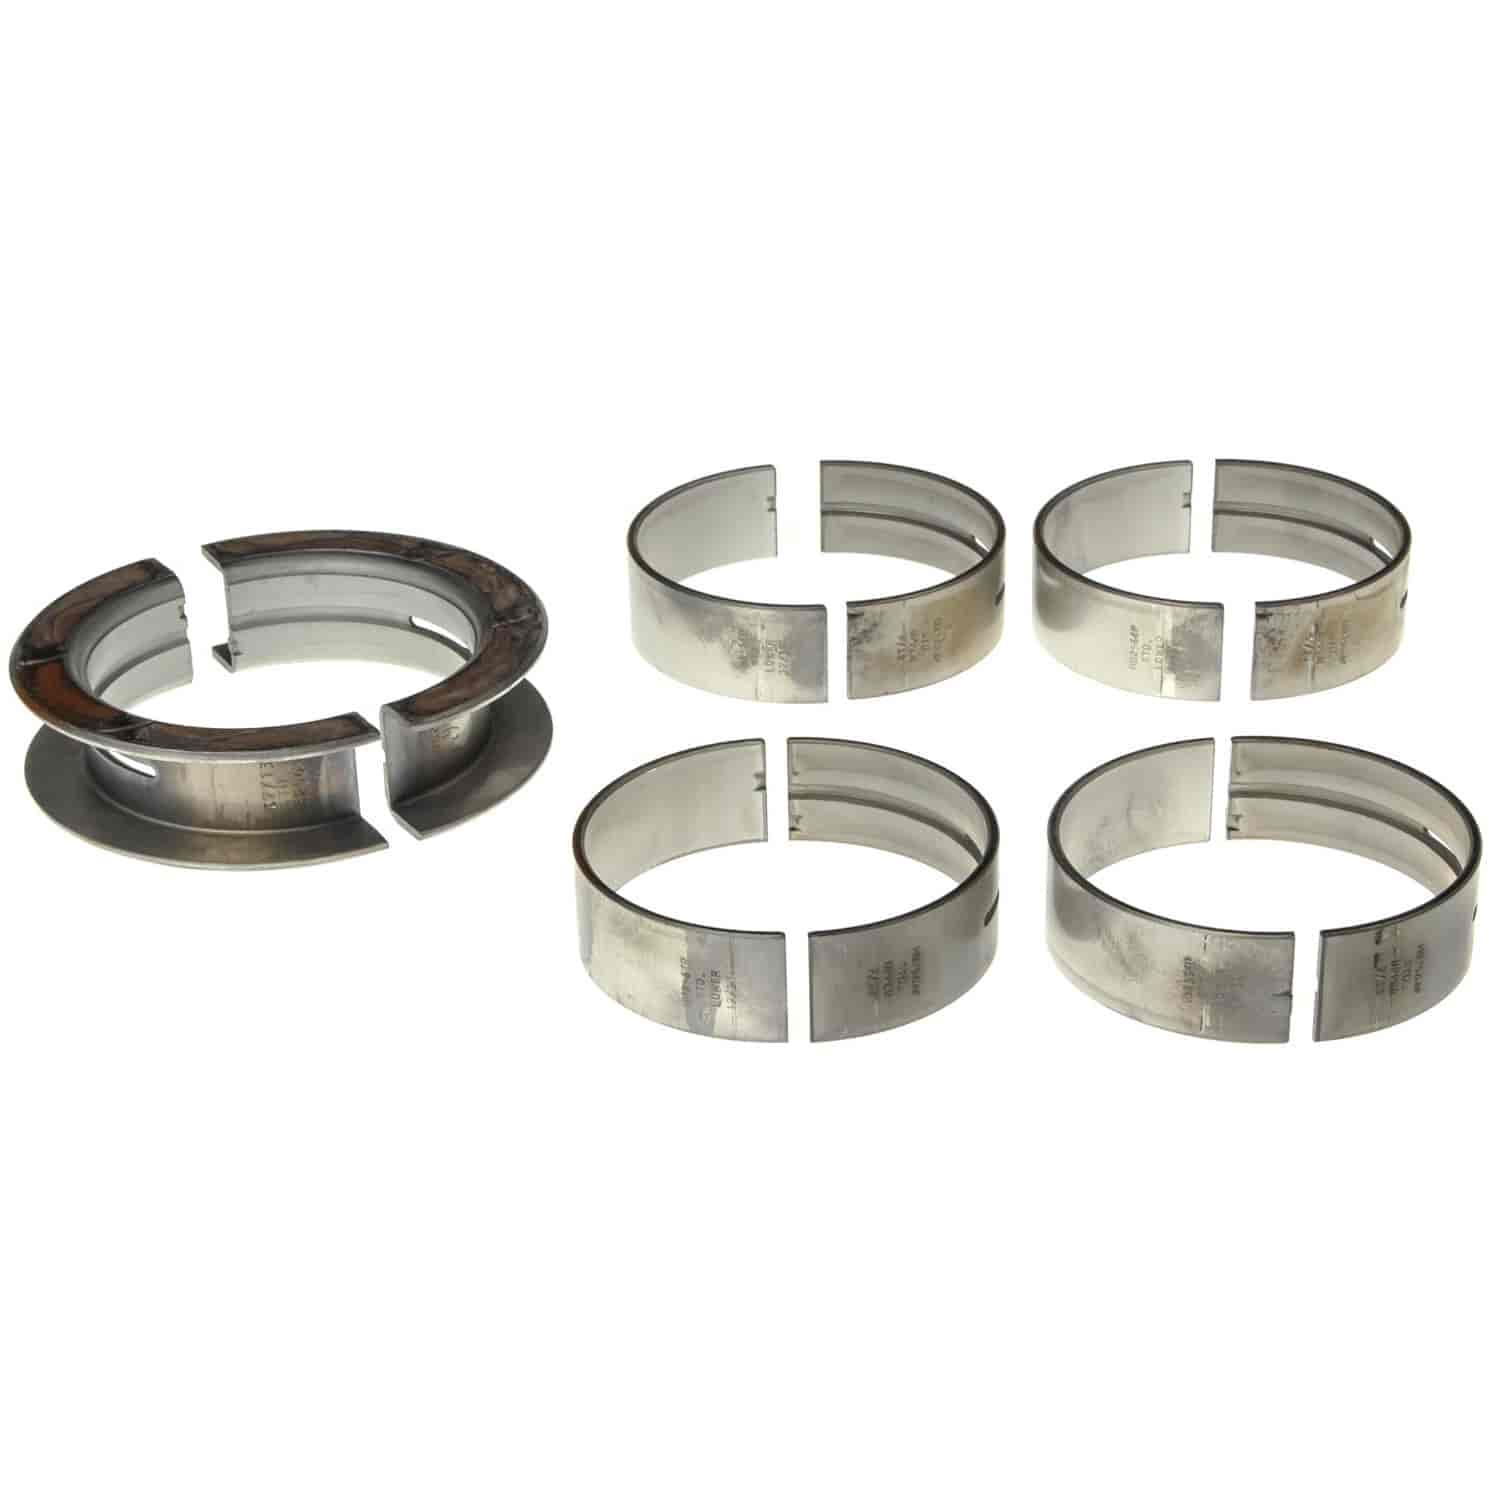 Main Bearing Set Ford 1968-1997 V8 370/429/460 (6.1/7.0/7.5L) with -.020" Undersize